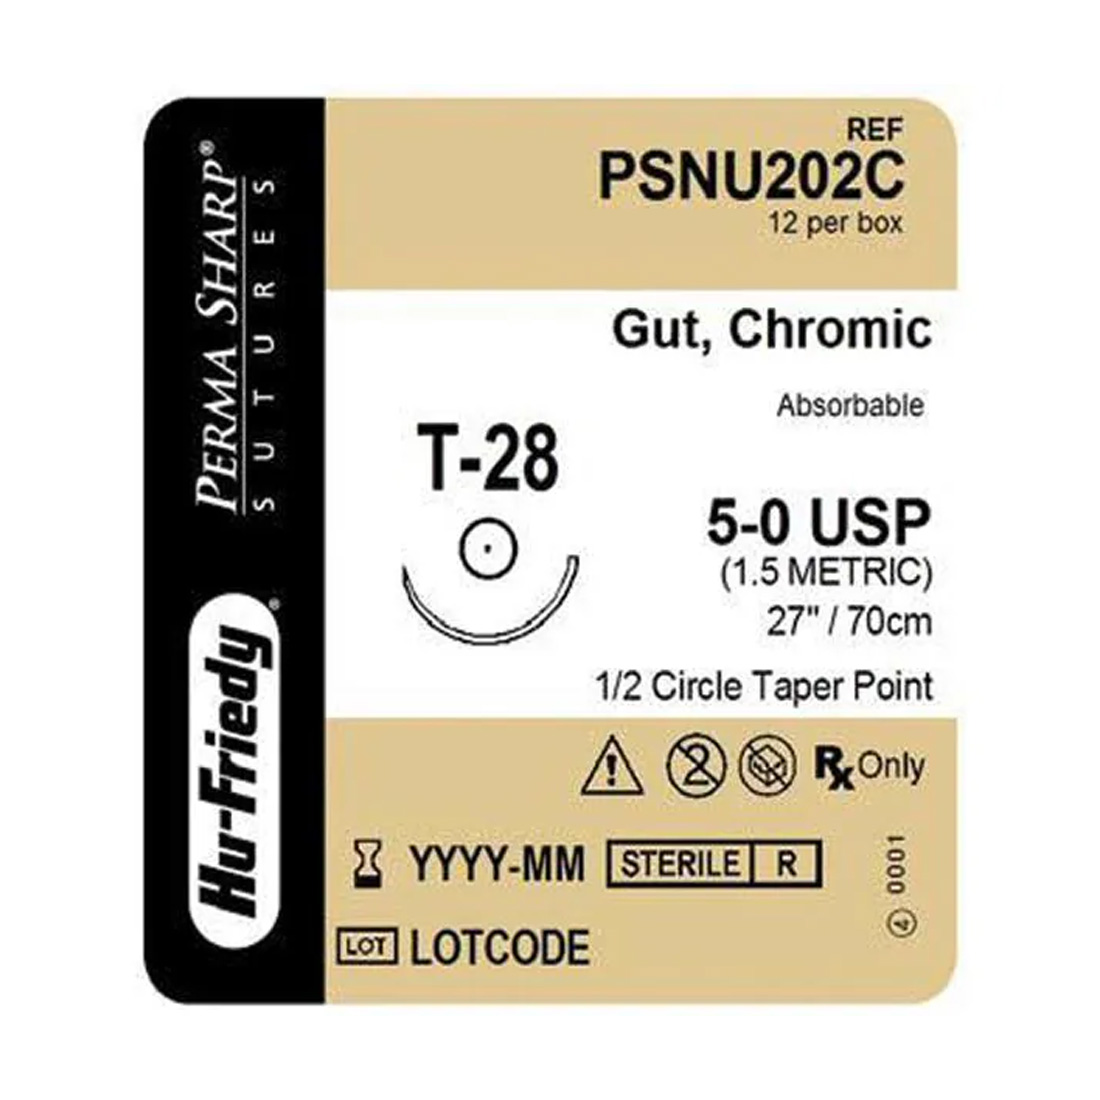 Hu-Friedy 5-0 Chromic Gut Sutures 27", T-28 Needle 17.5mm, 1/2 Circle Taper Point - 12/Box